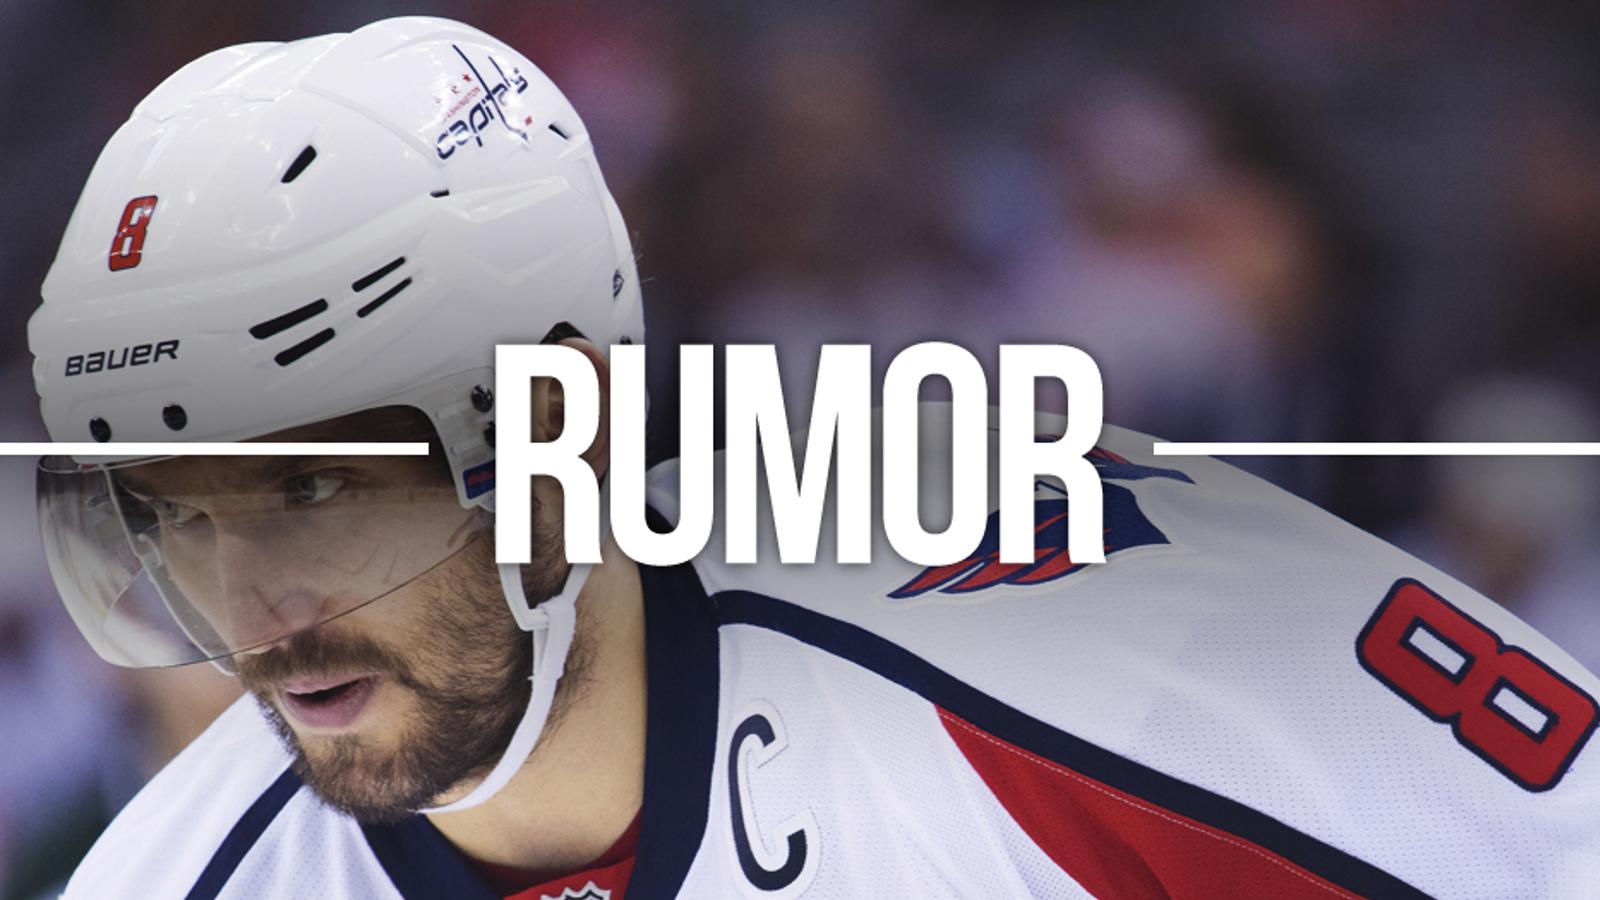 New details emerge and provide potential clues for an offseason Ovechkin trade.